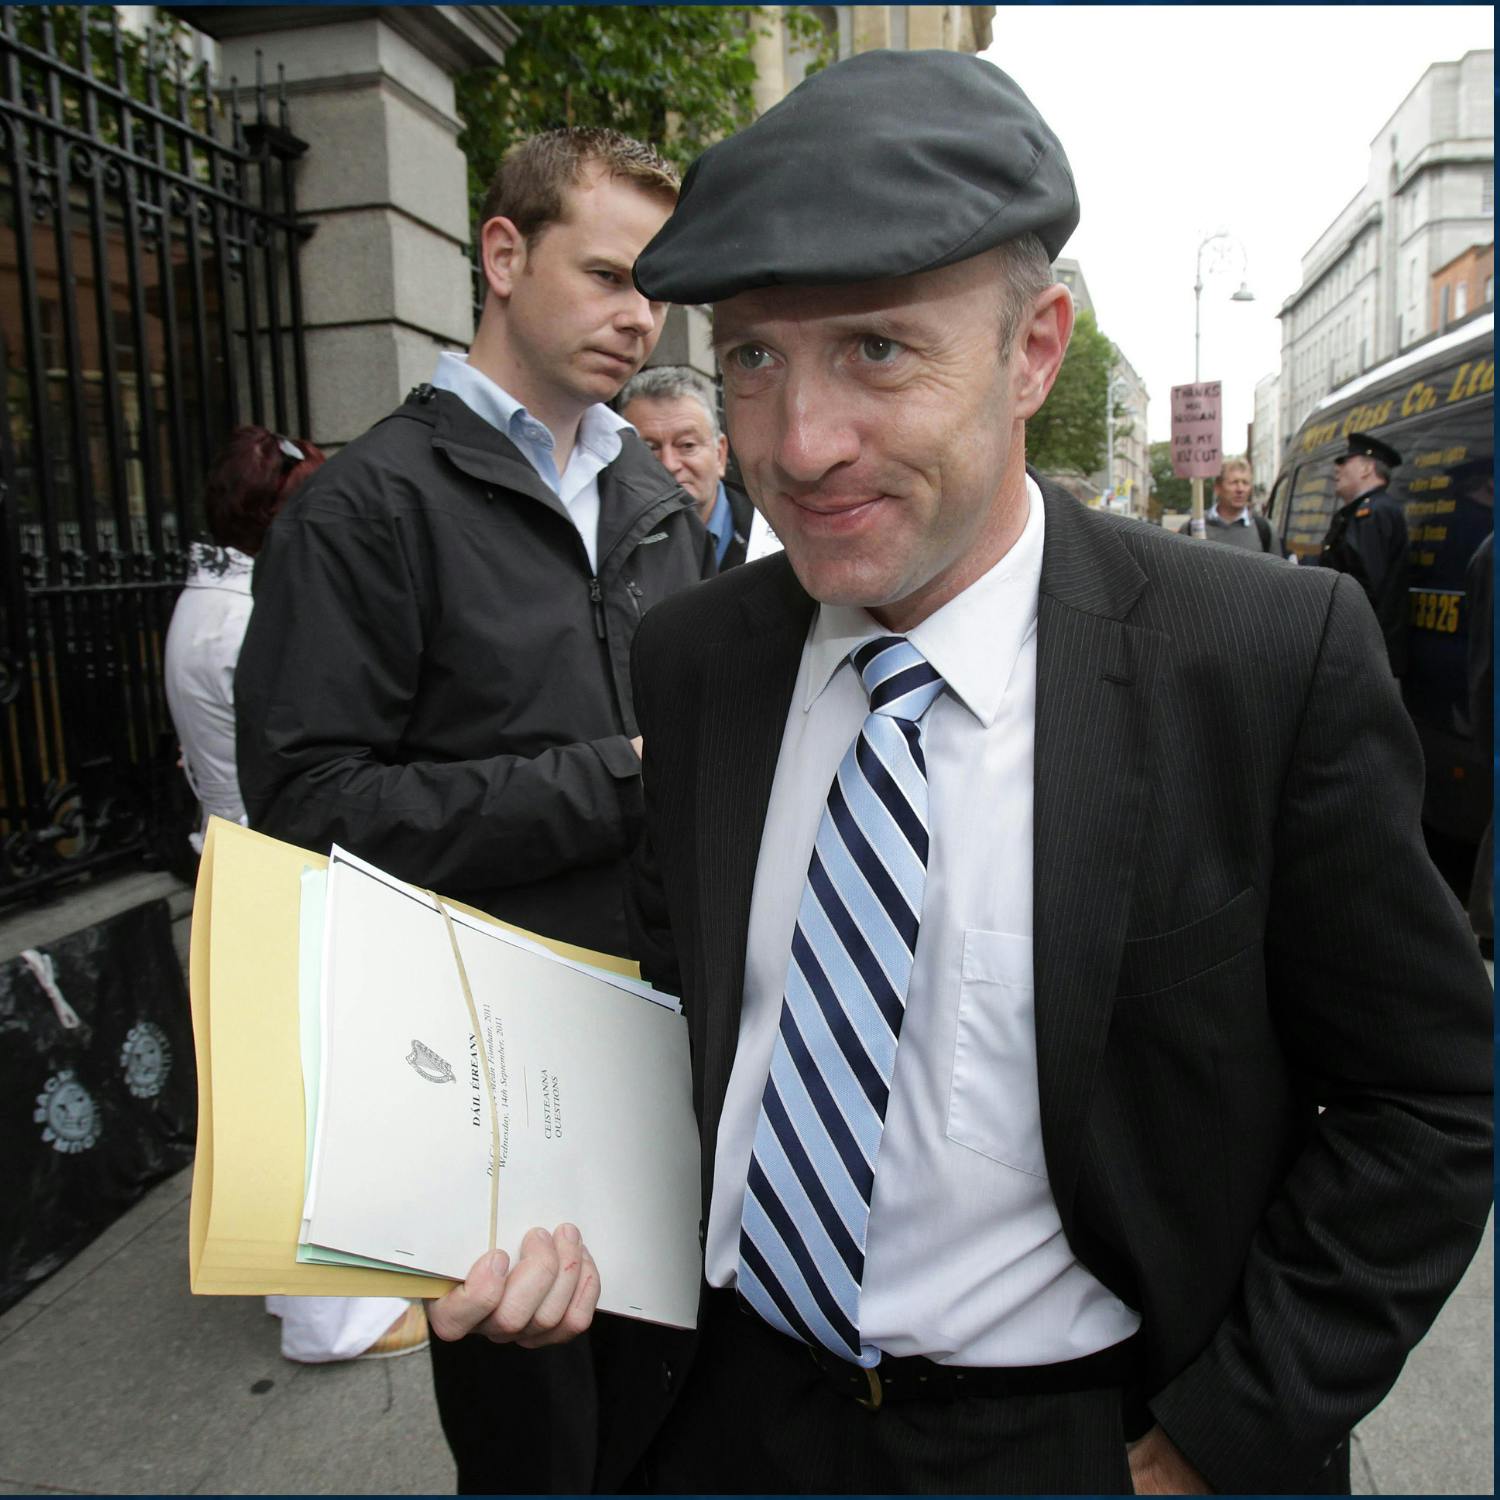 Independent TD Michael Healy-Rae has denounced “outrageous” and “hurtful” online abuse